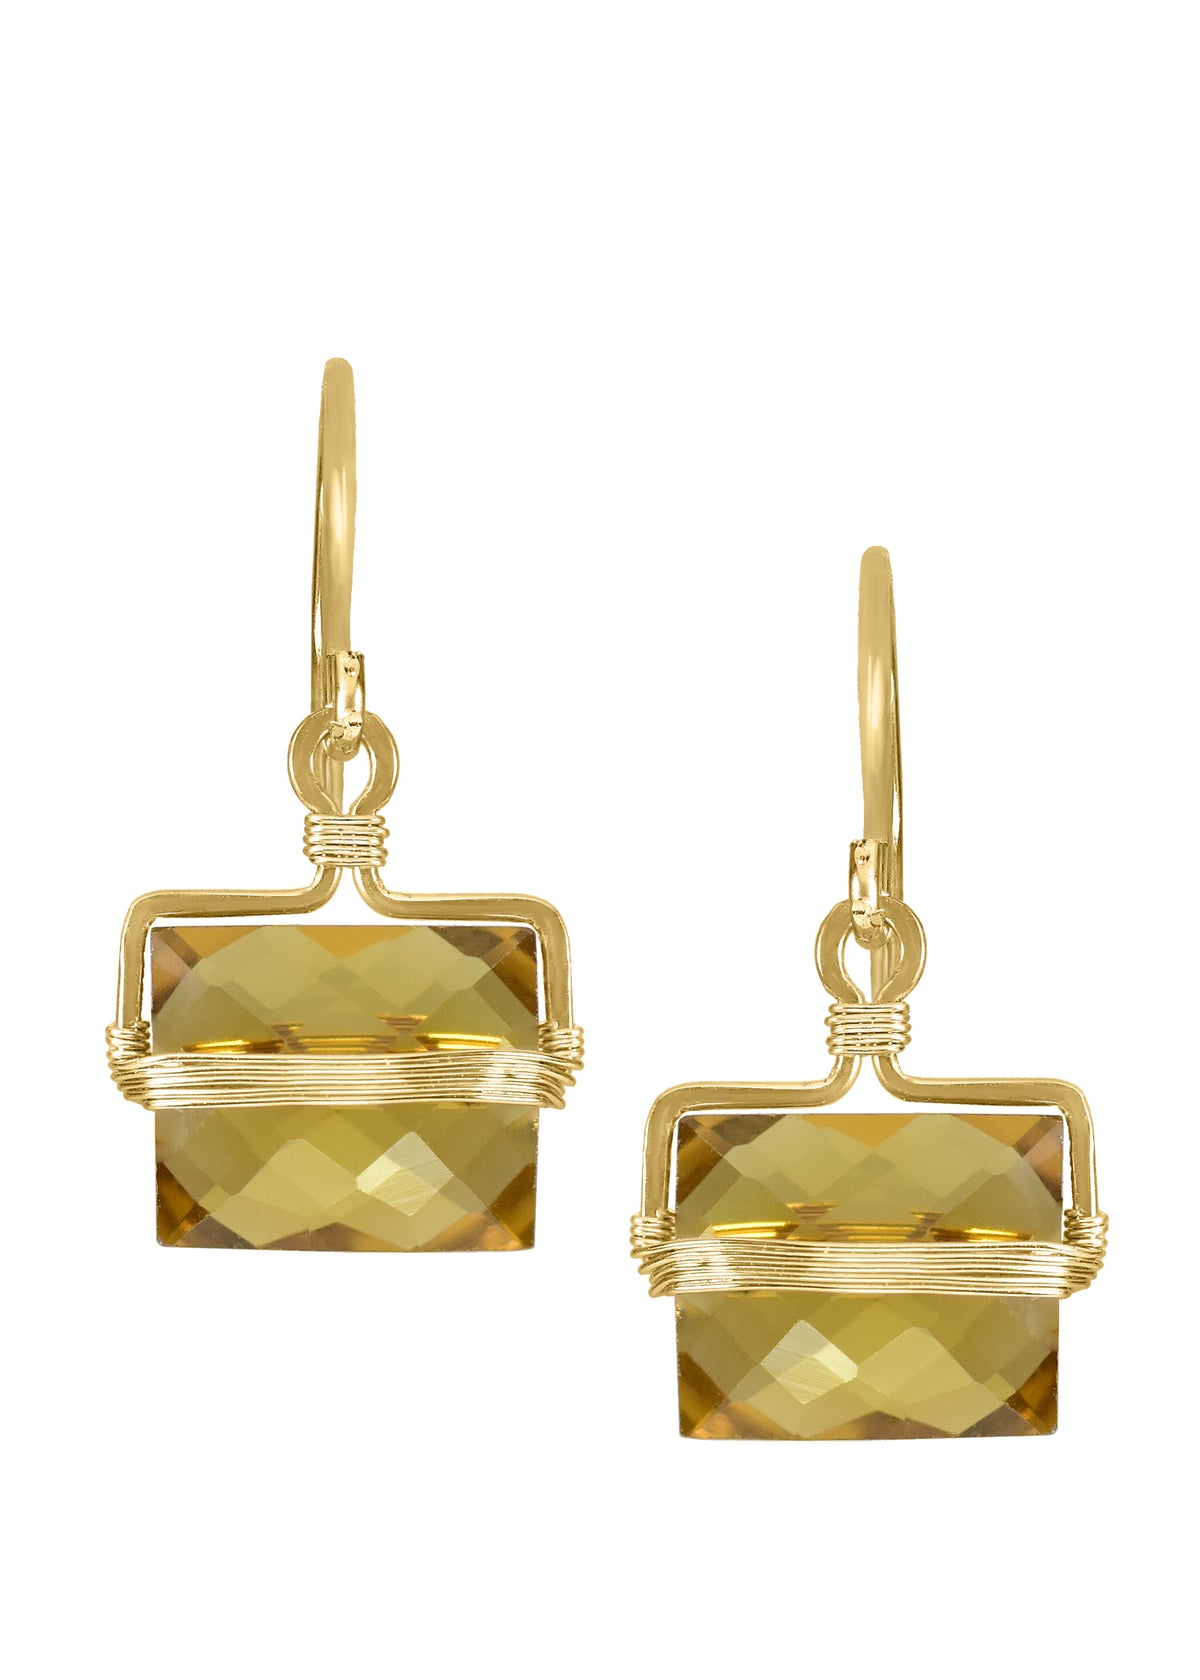 Whiskey quartz 14k gold fill Earrings measure 7/8&quot; in length (including the ear wires) and 1/2&quot; in width at the widest point Handmade in our Los Angeles studio